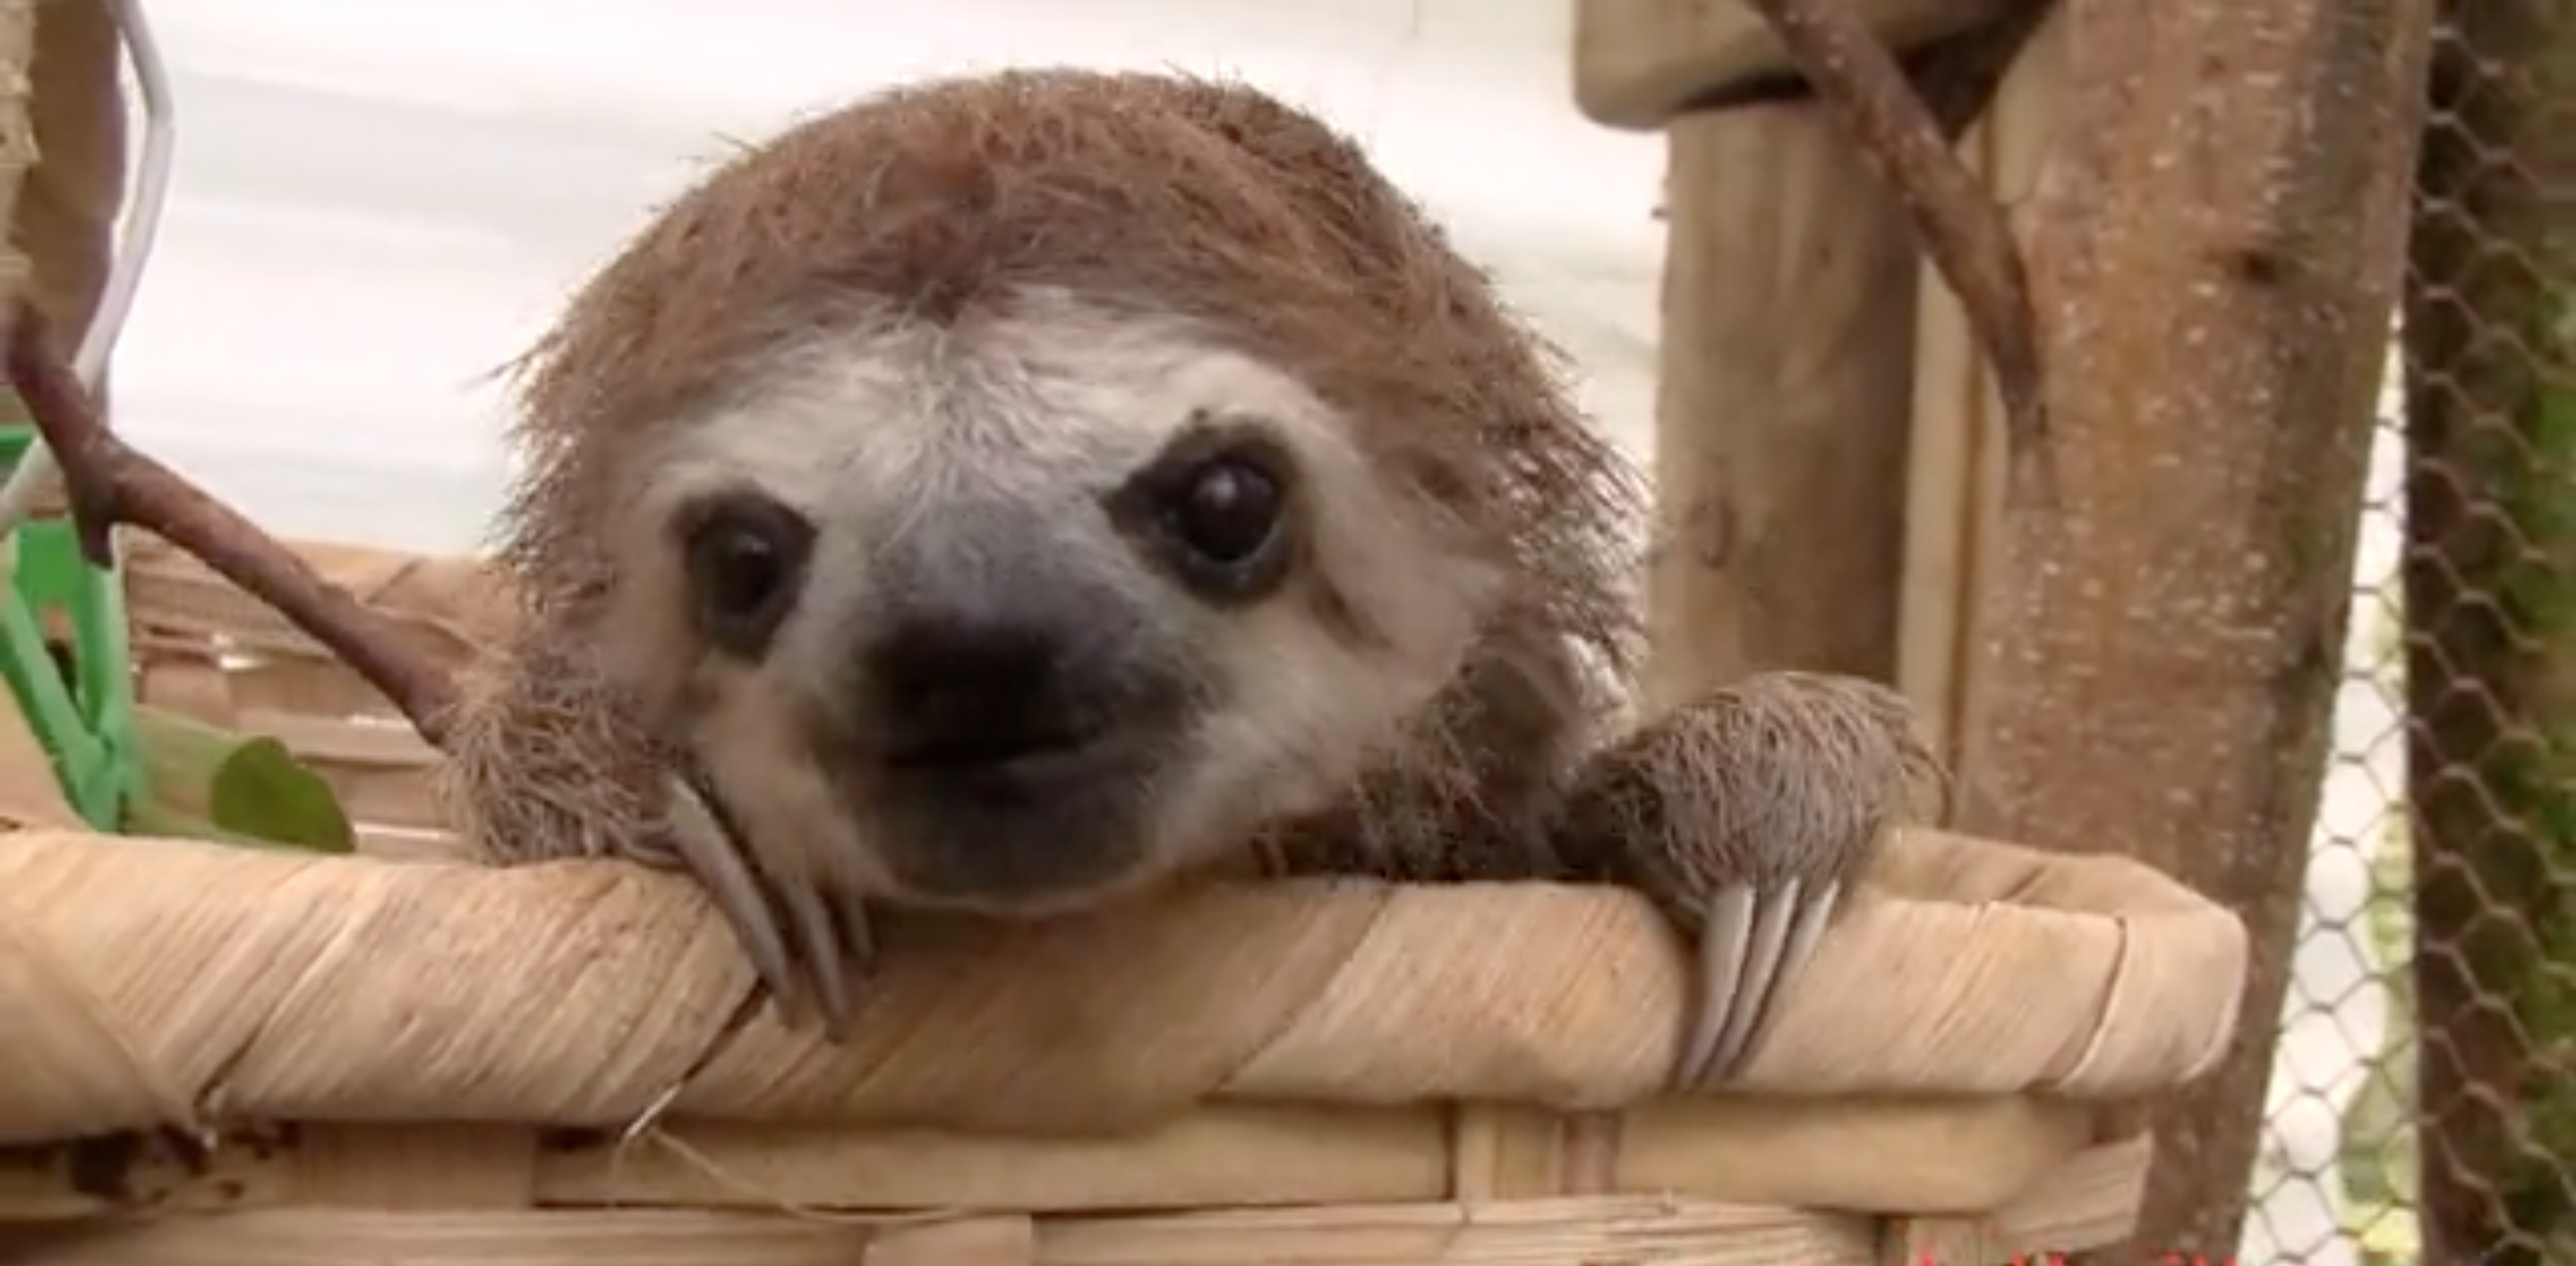 Video: Cute Baby Sloths Make Squeak Sounds | Time